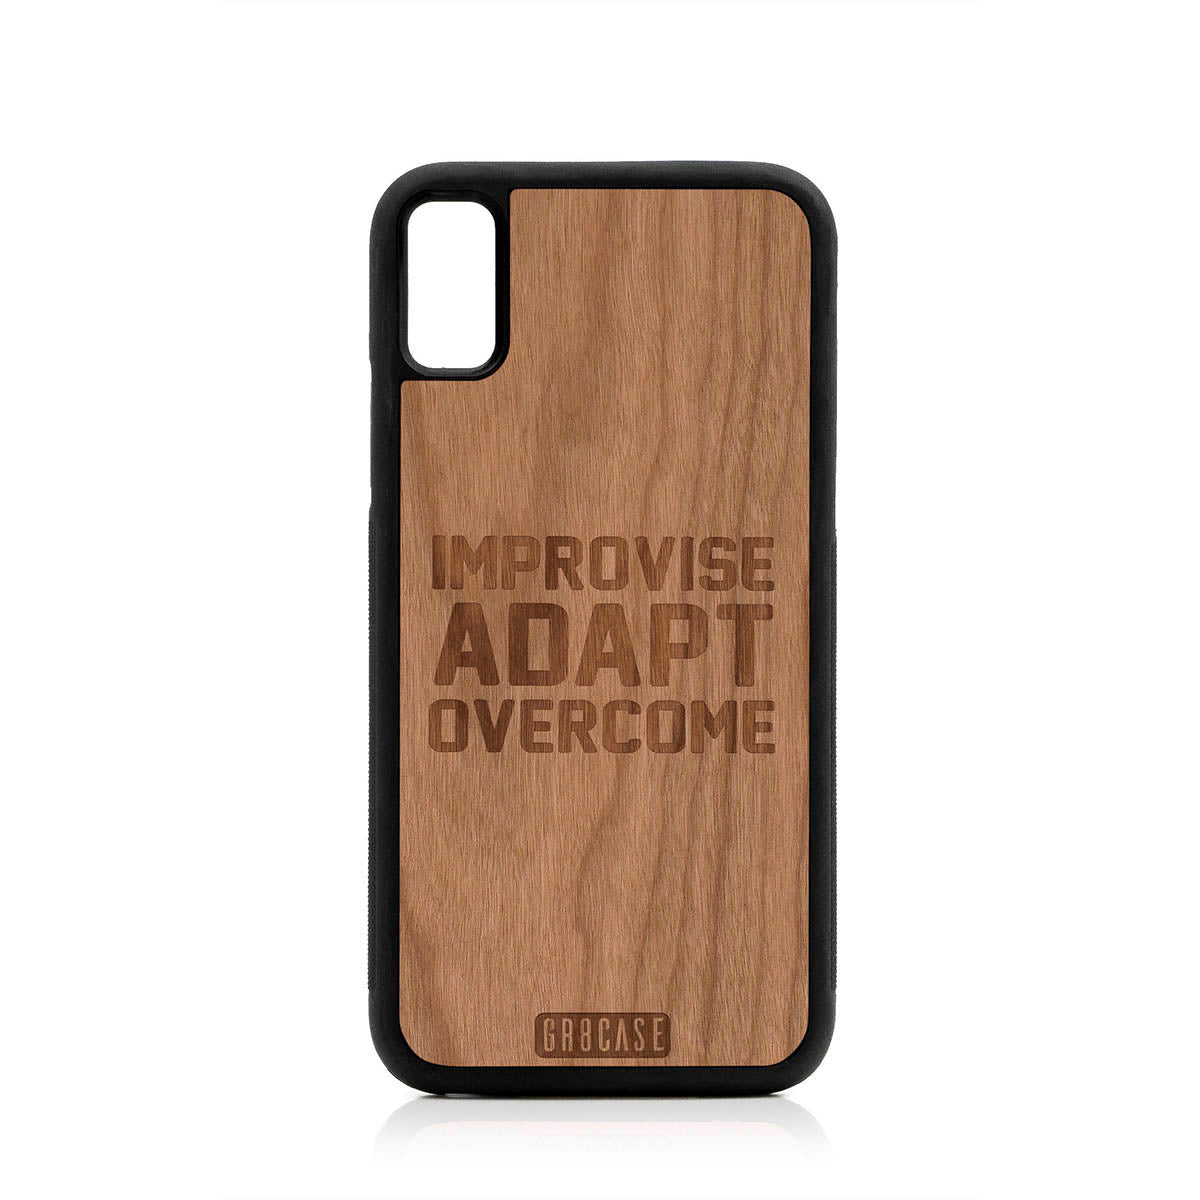 Improvise Adapt Overcome Design Wood Case For iPhone X/XS